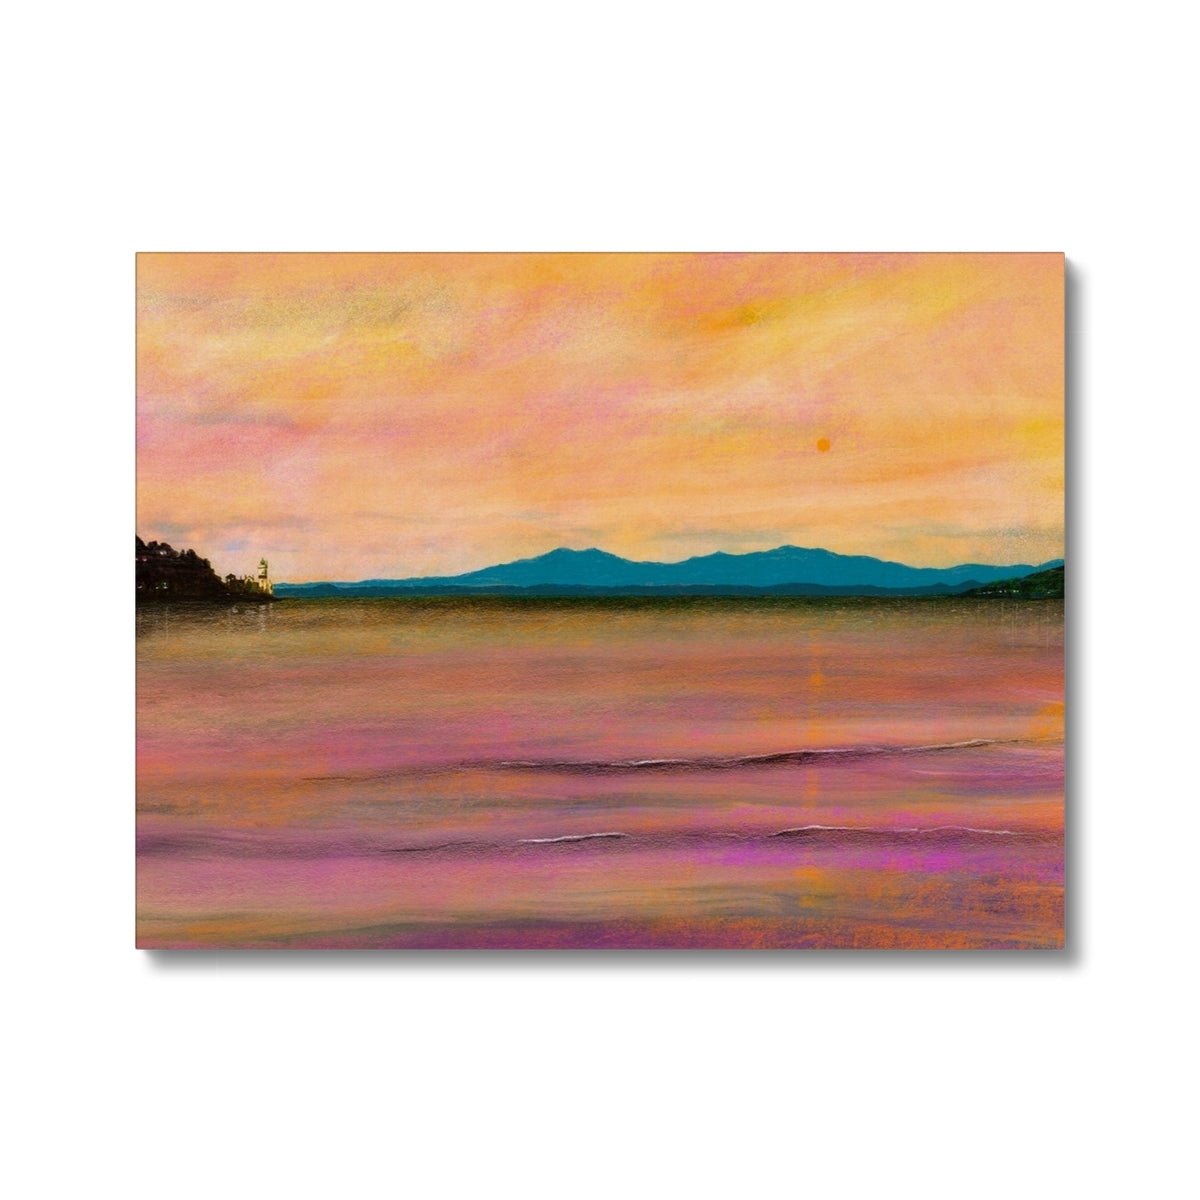 Dusk Over Arran & The Cloch Lighthouse Painting | Canvas From Scotland-Contemporary Stretched Canvas Prints-Arran Art Gallery-24"x18"-Paintings, Prints, Homeware, Art Gifts From Scotland By Scottish Artist Kevin Hunter